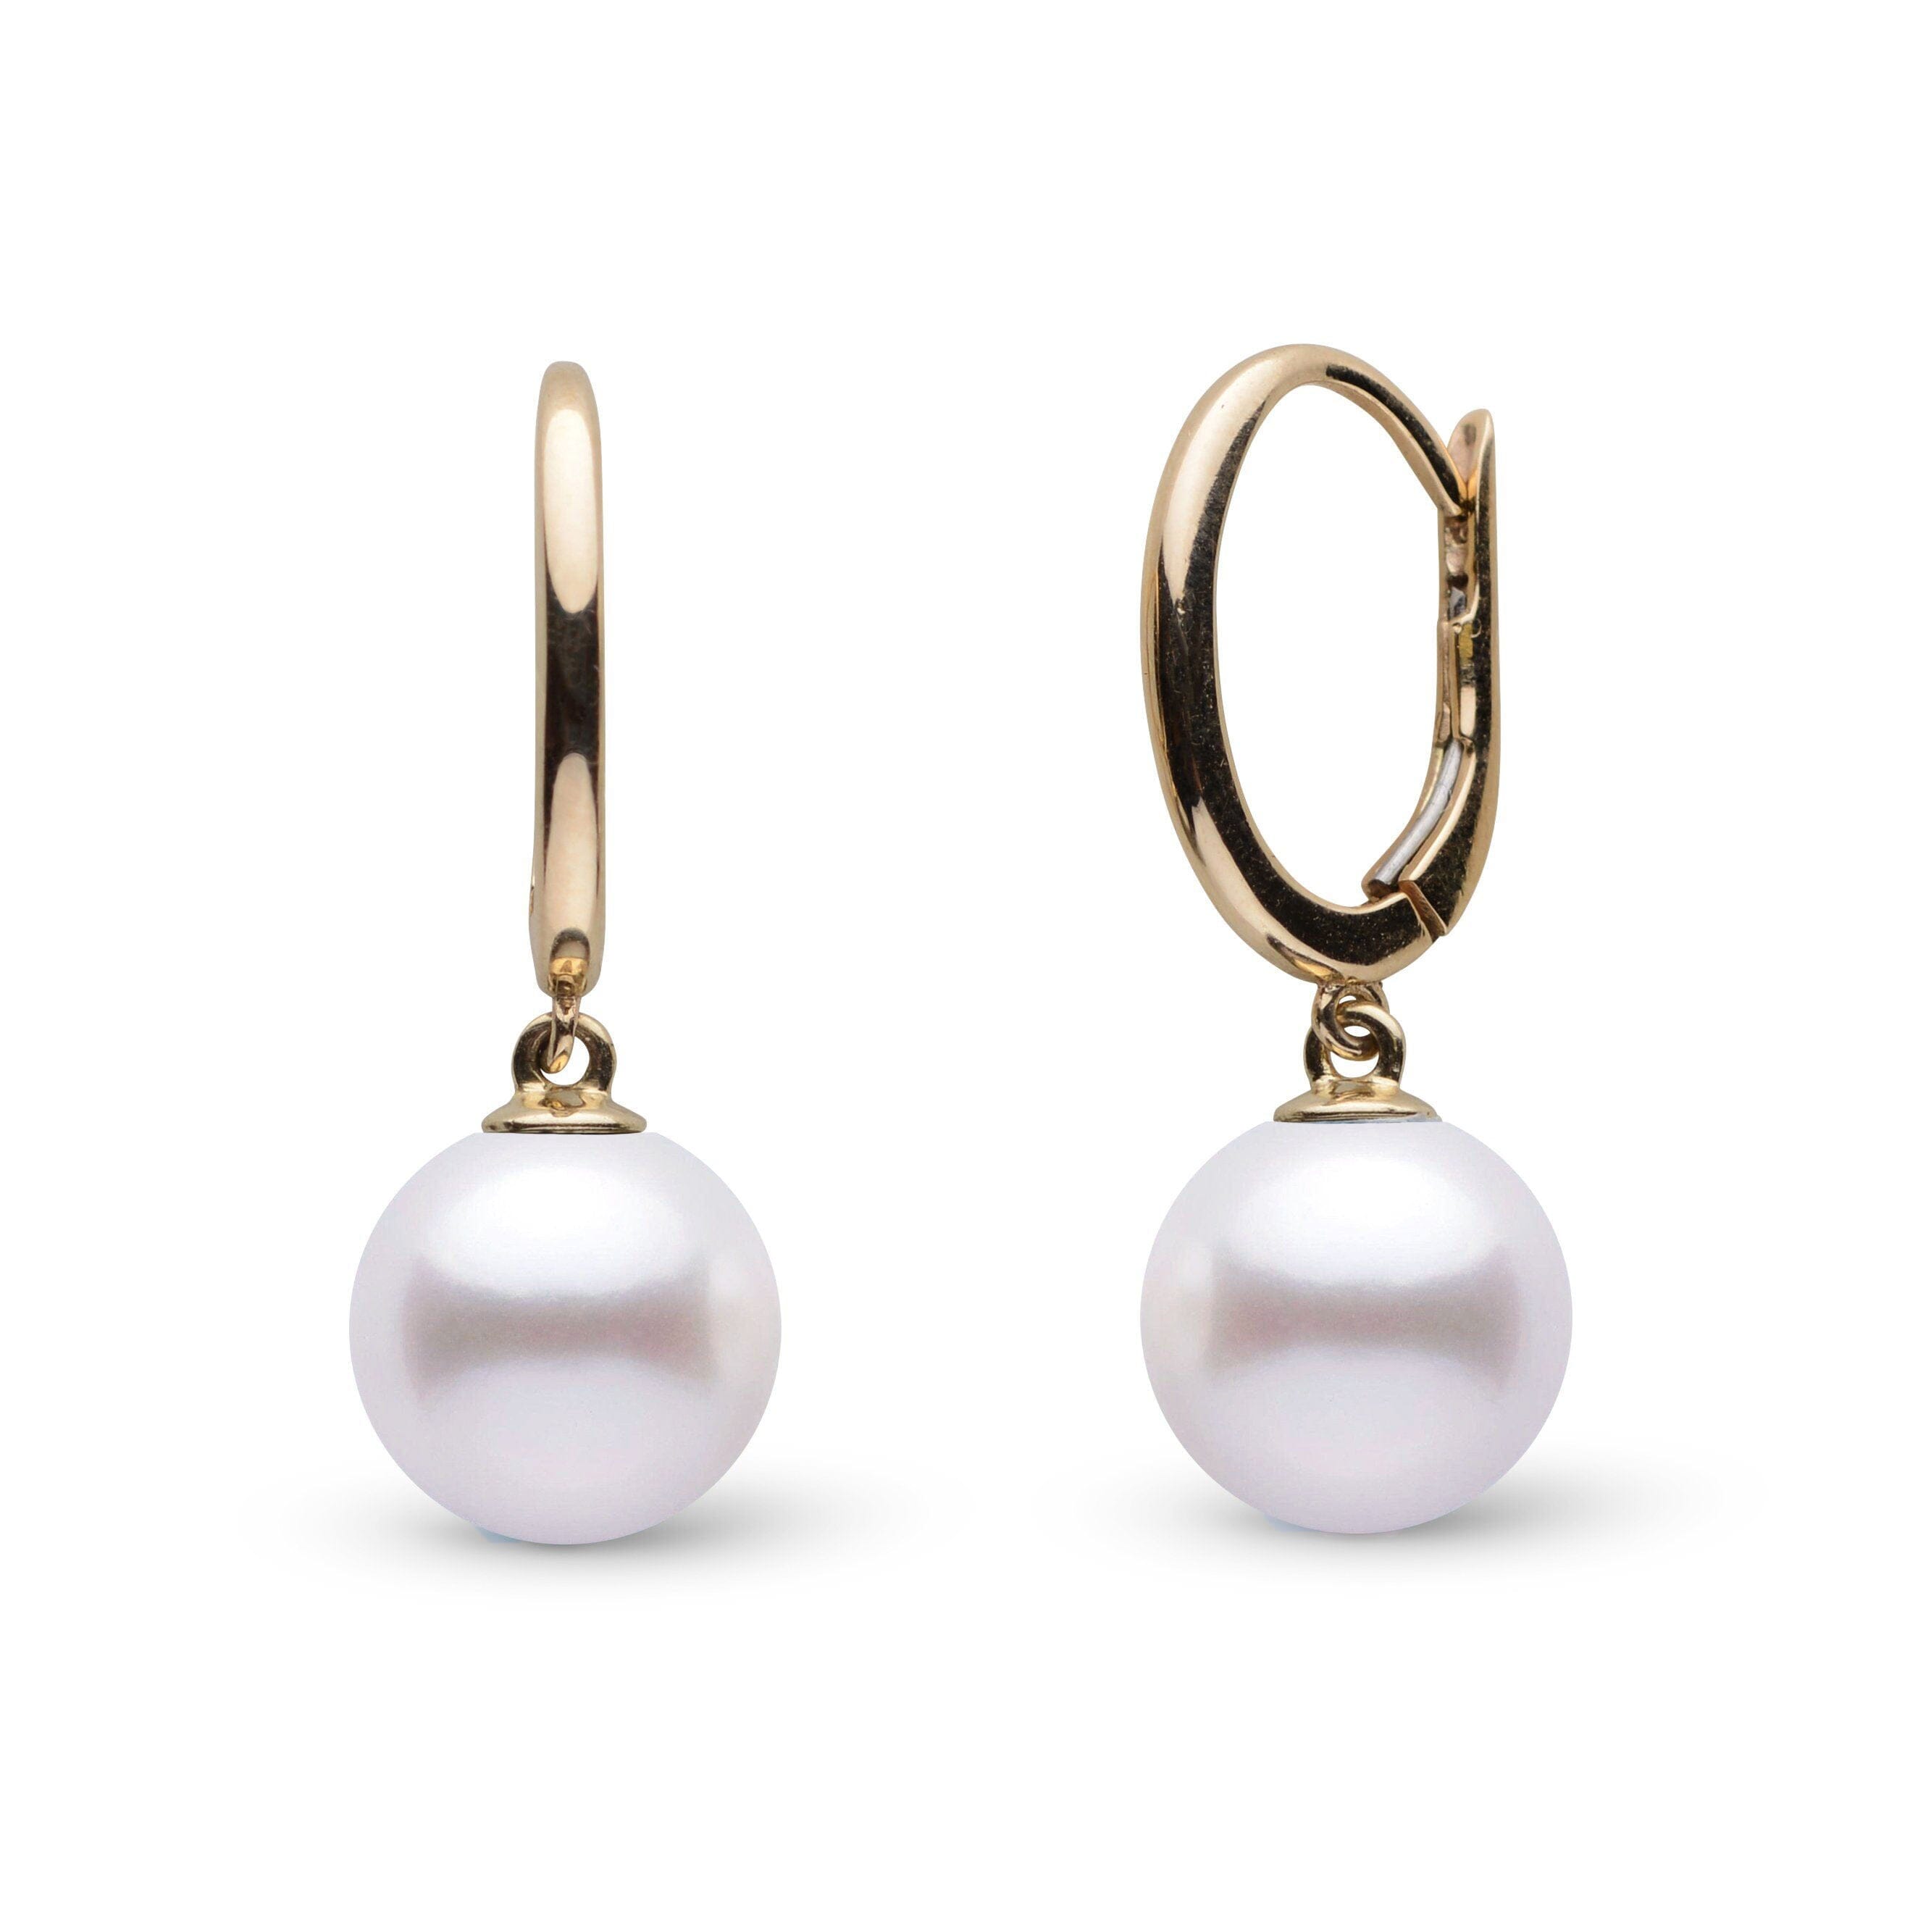 Solid Eternal Collection White Akoya 8.0-8.5 mm Pearl Dangle Earrings